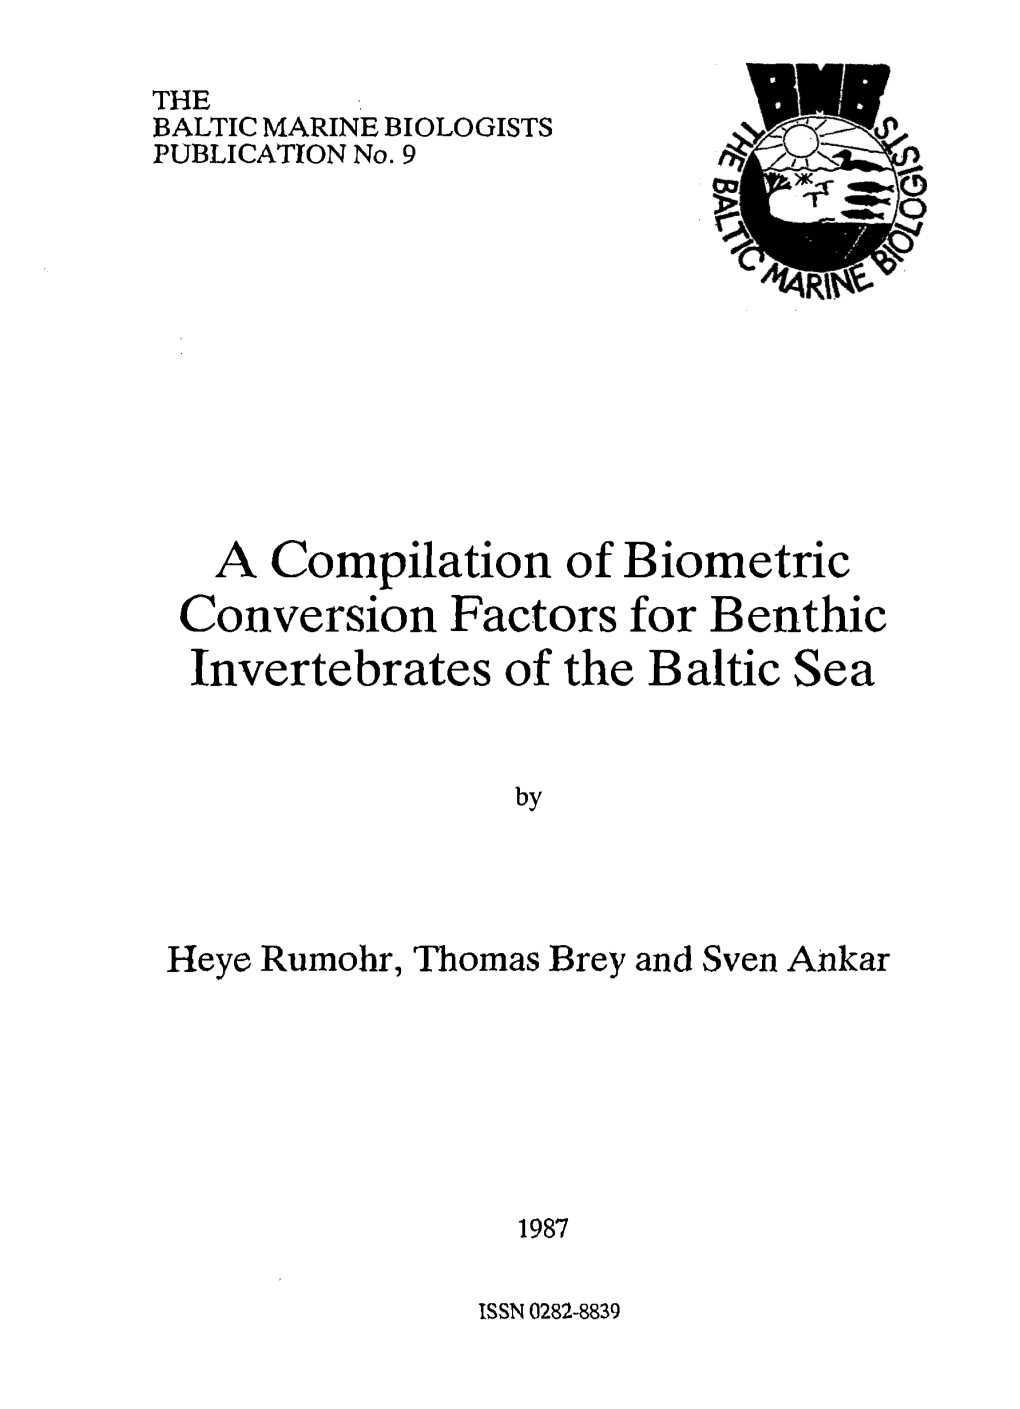 A Compilation of Biometric Conversion Factors for Benthic Invertebrates of the Baltic Sea